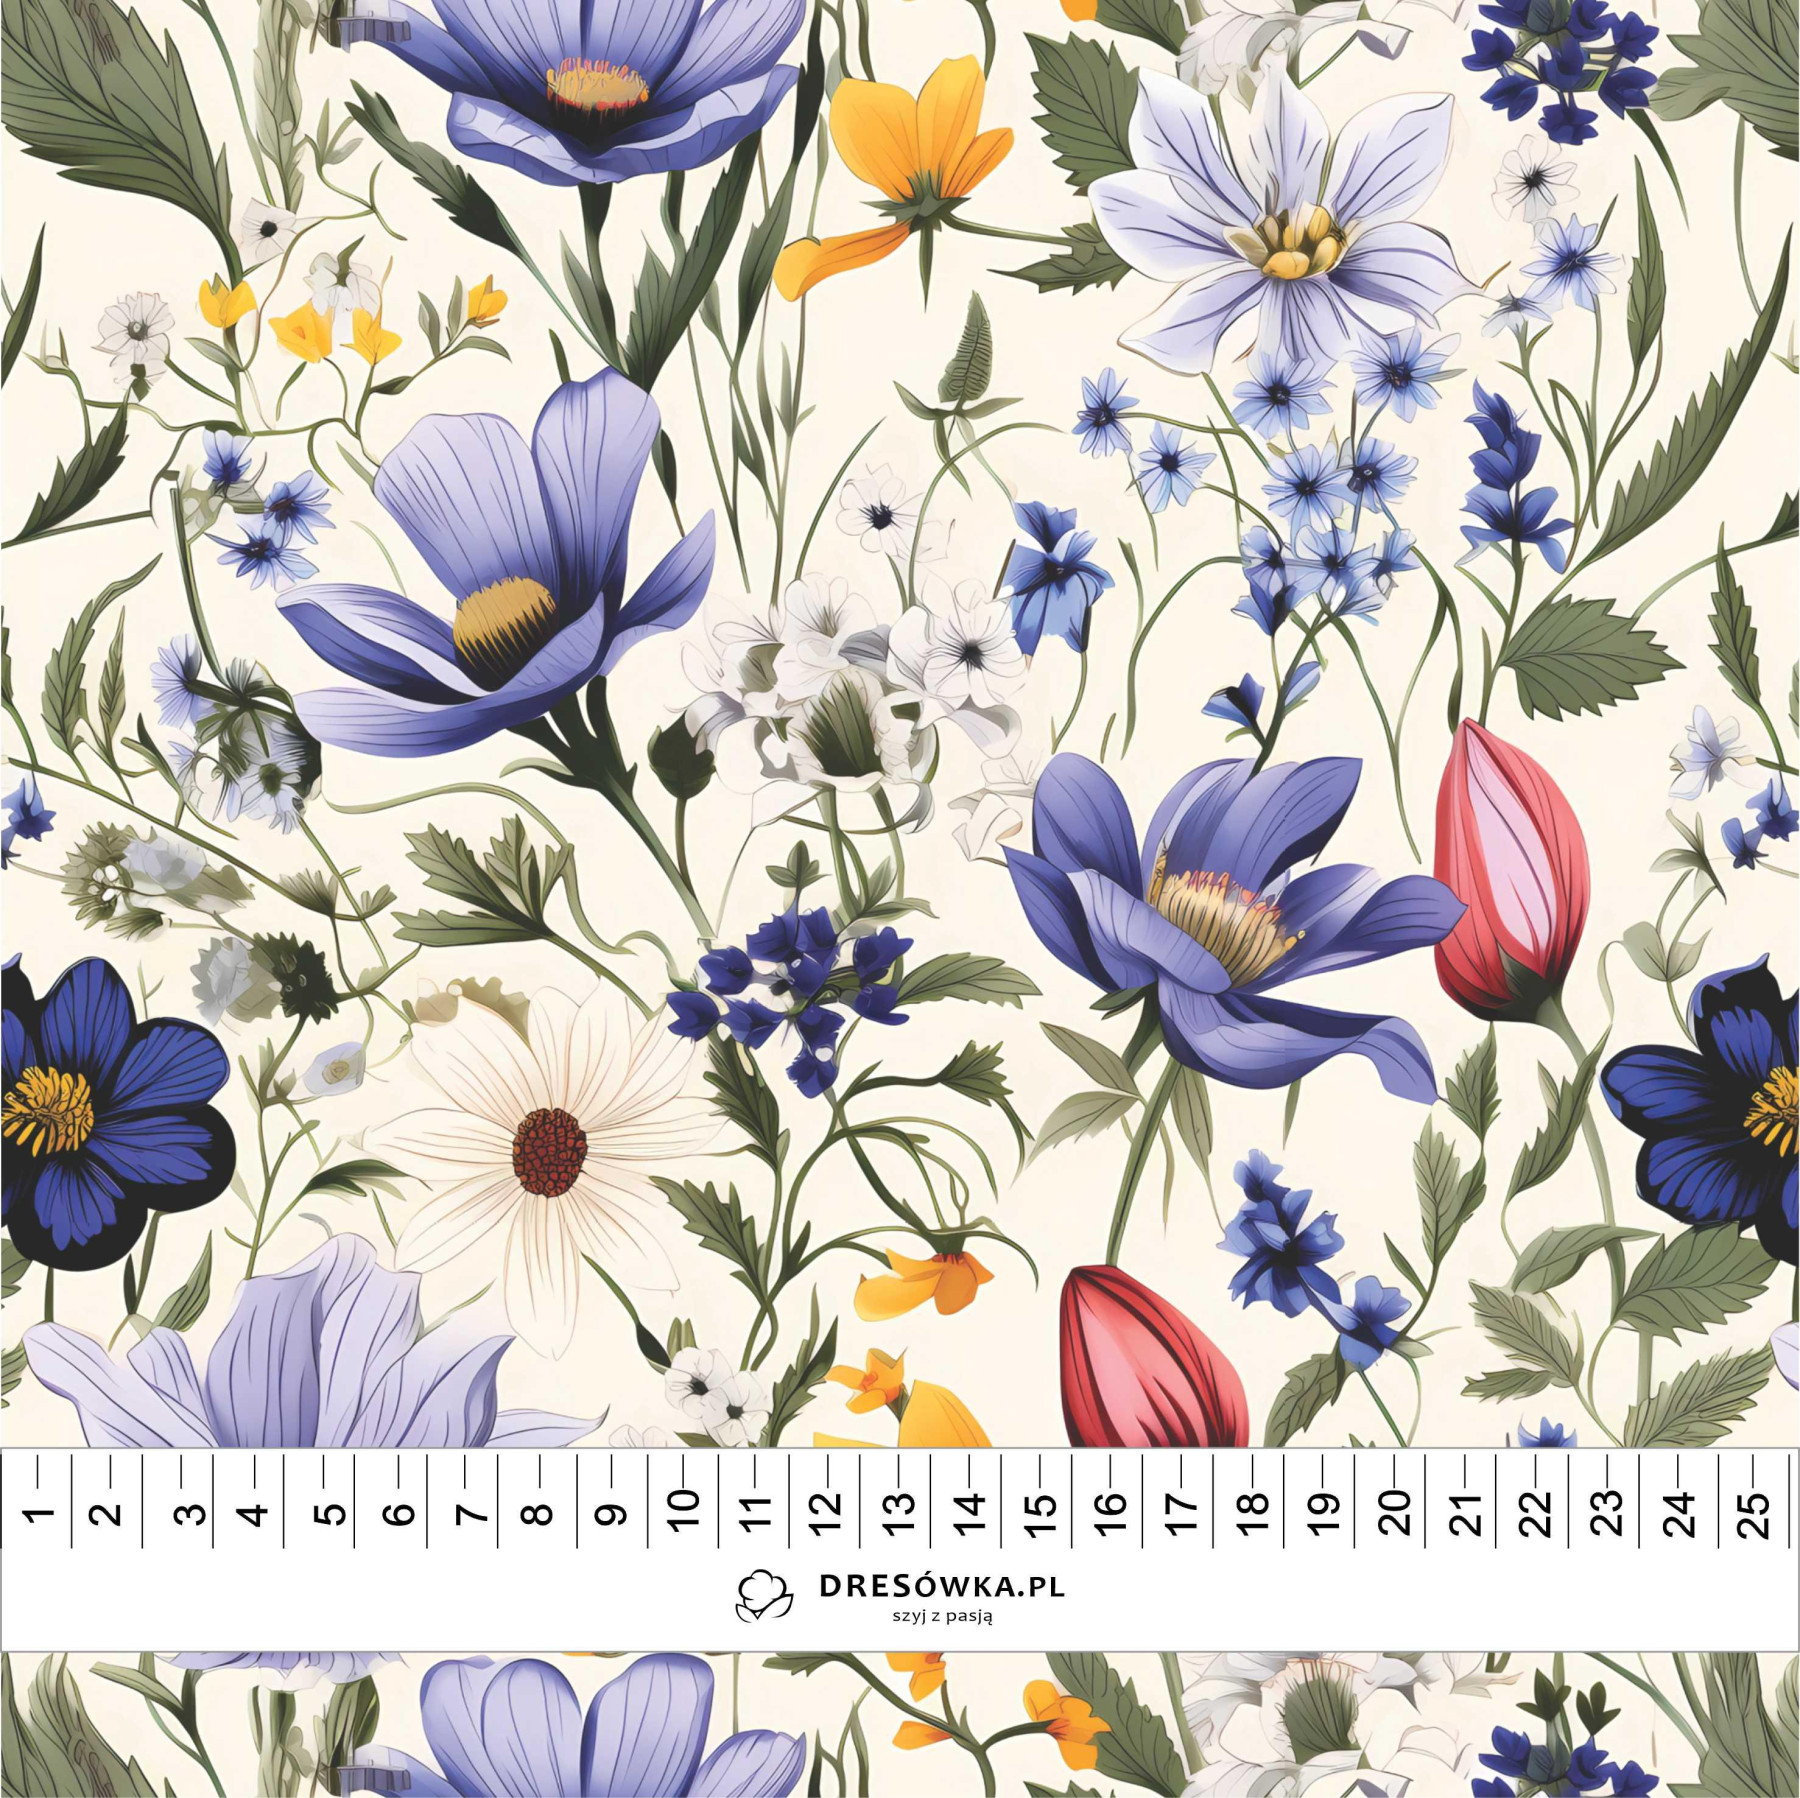 FLOWERS wz.4 - Woven Fabric for tablecloths